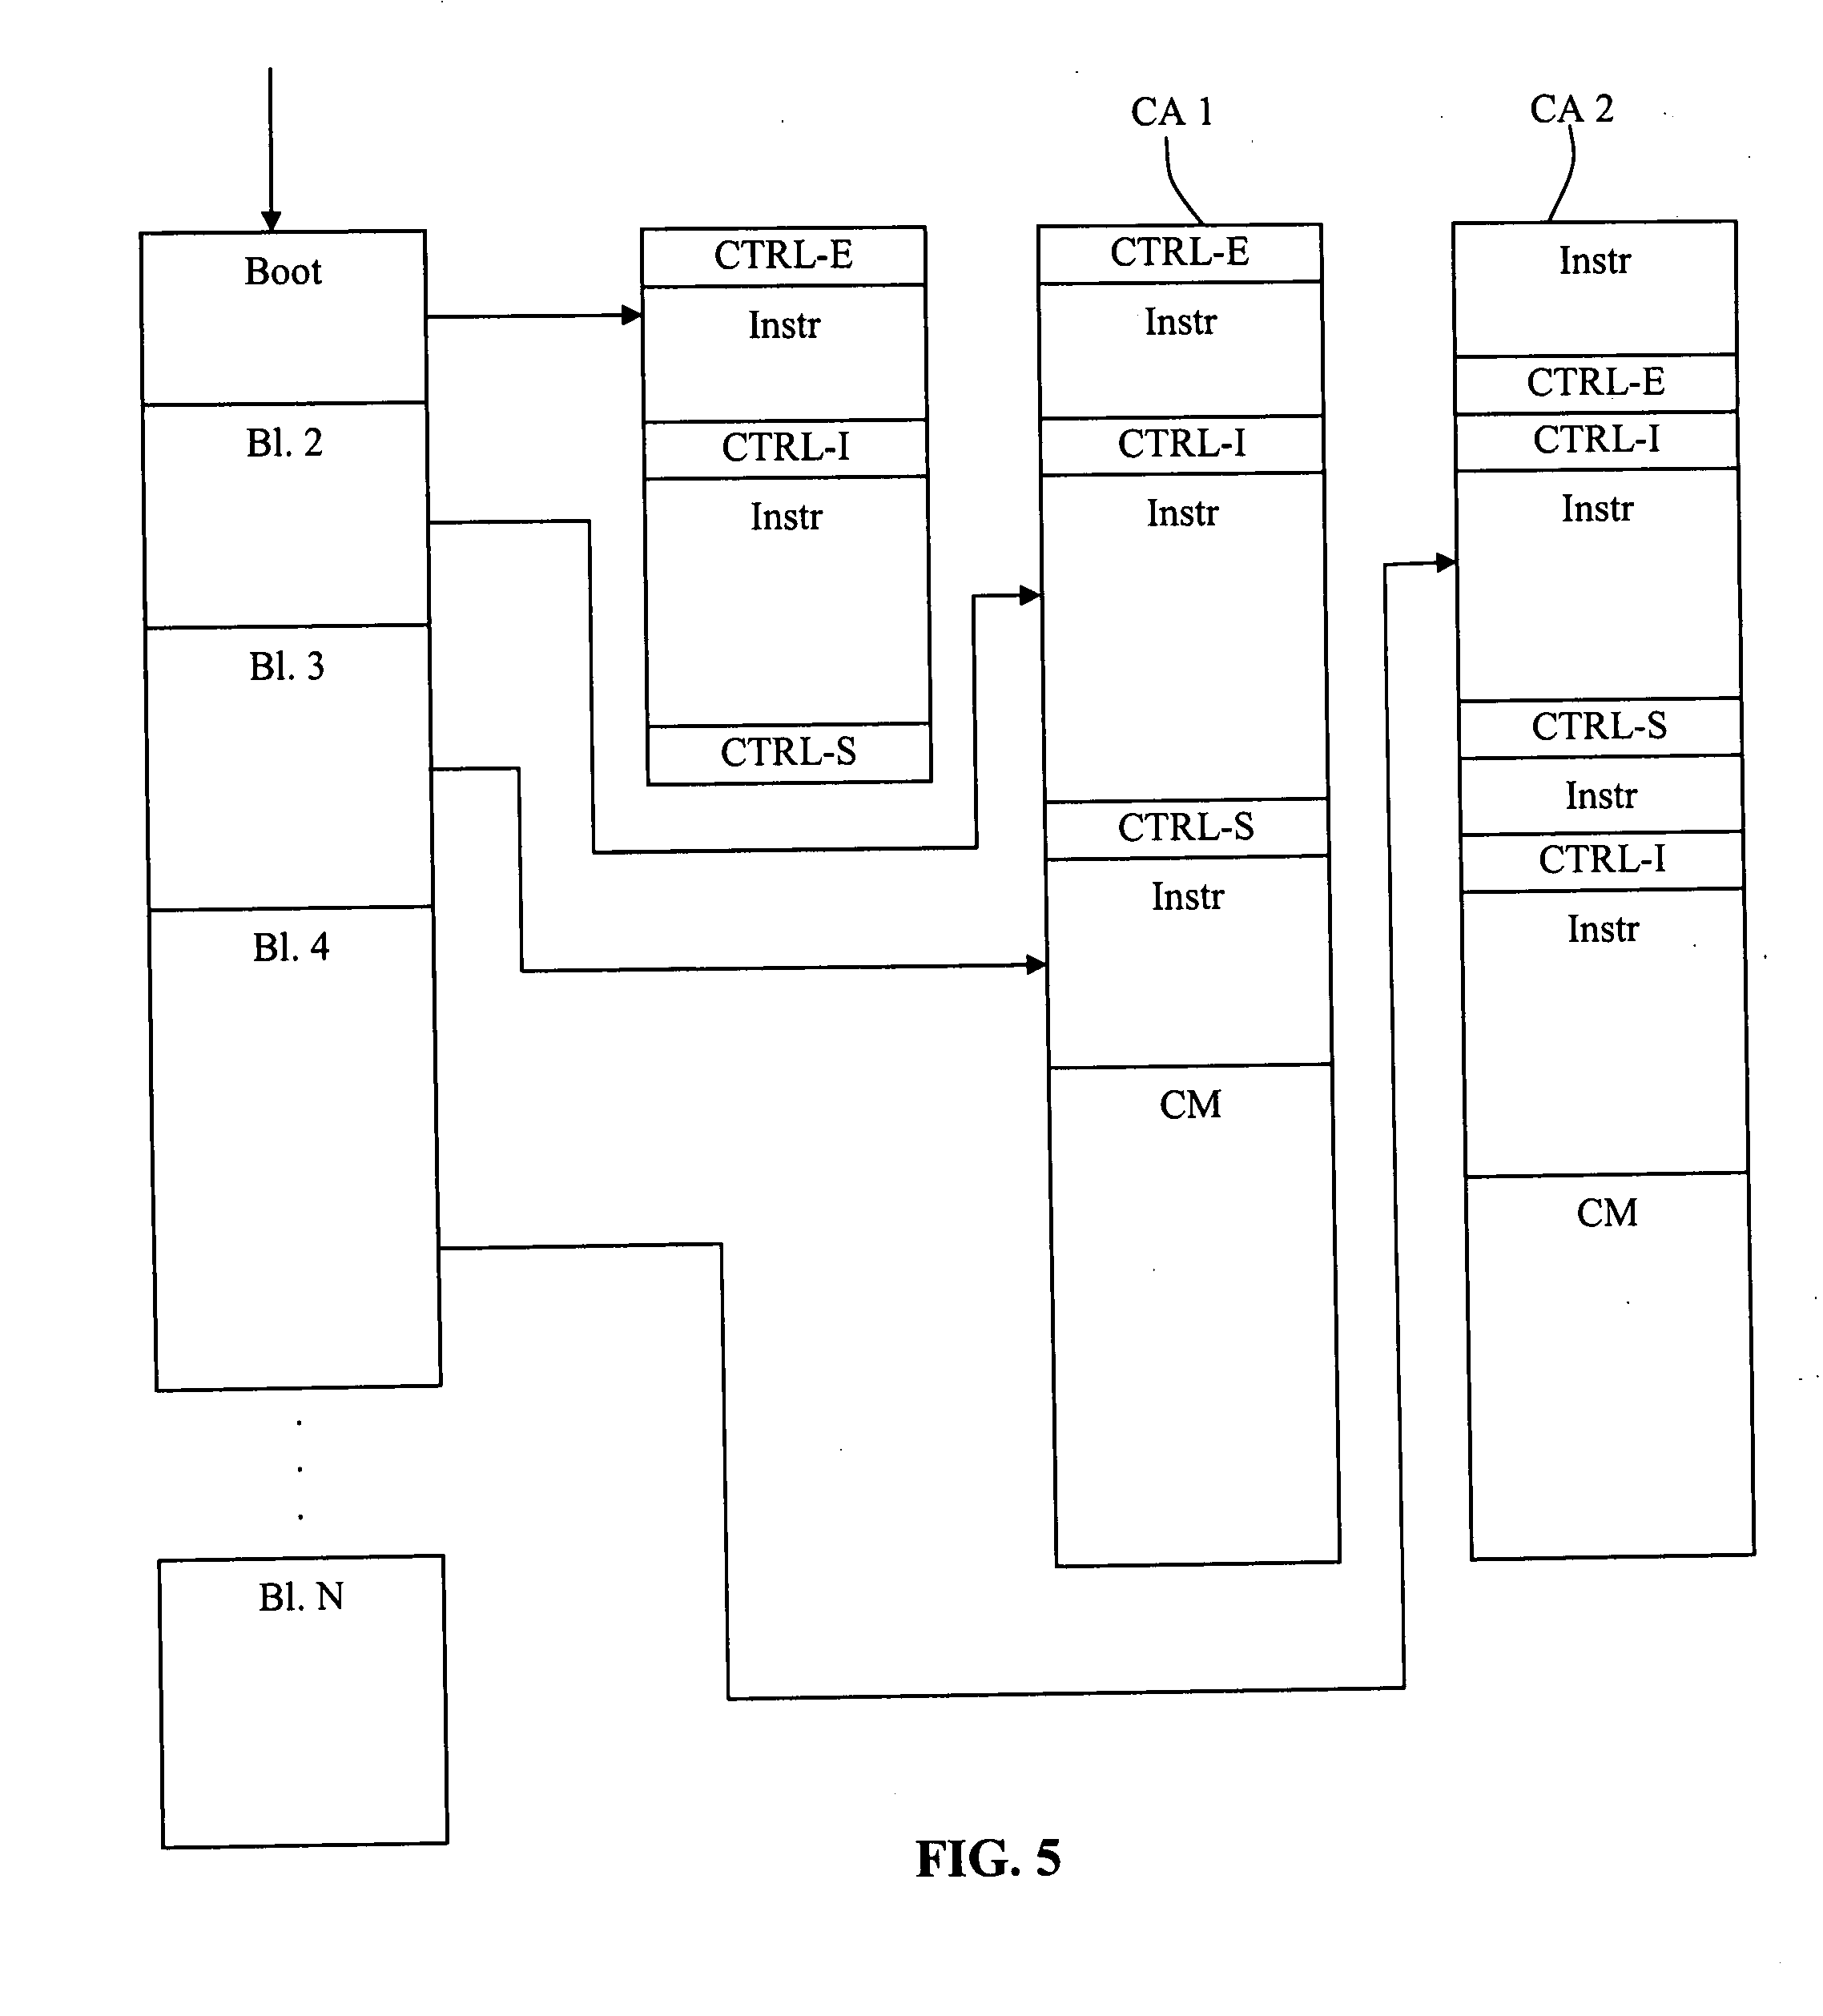 Method to control the execution of a program by a microcontroller